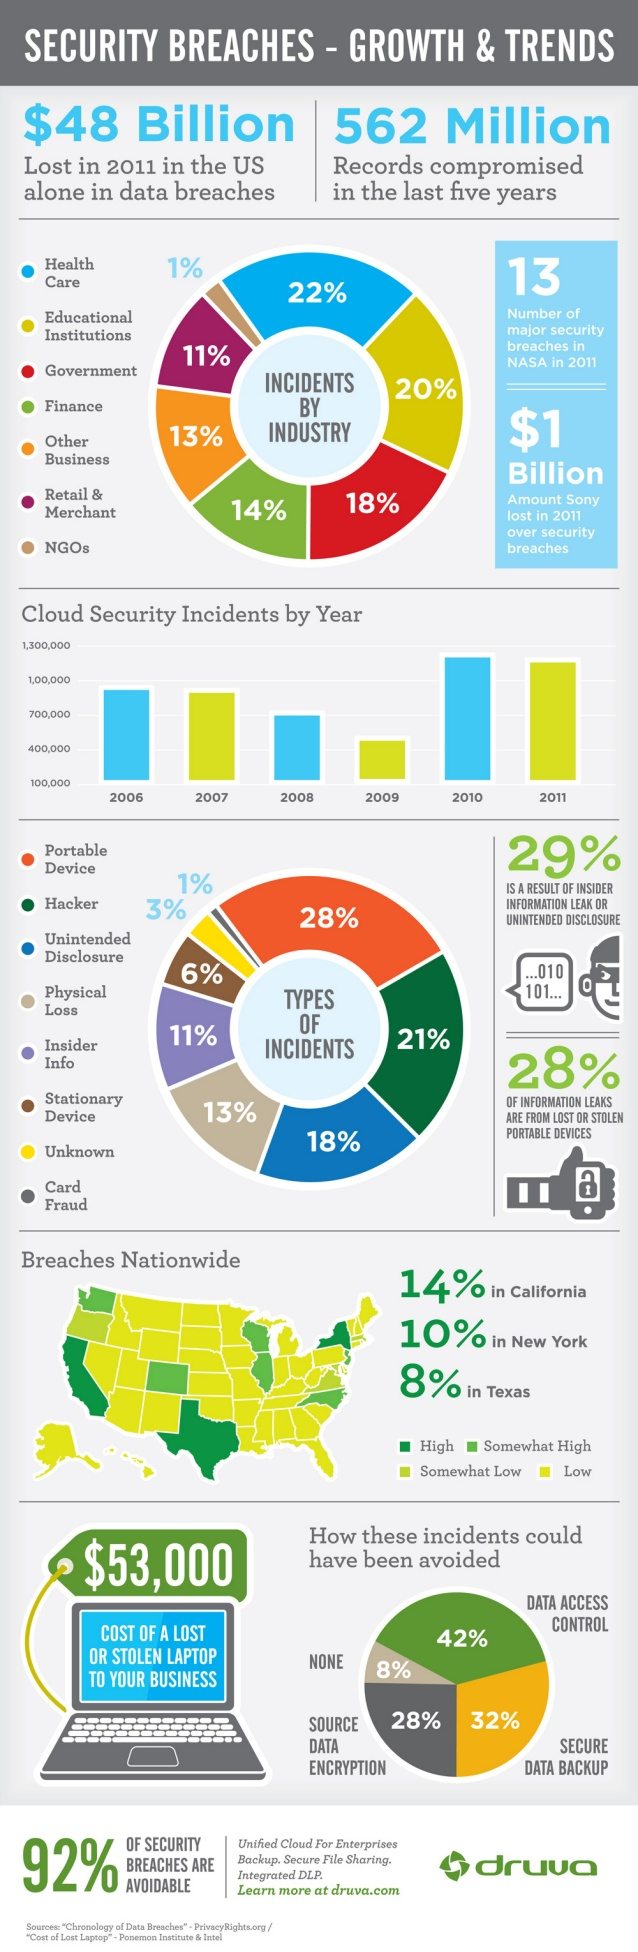 Security breaches growth and trends